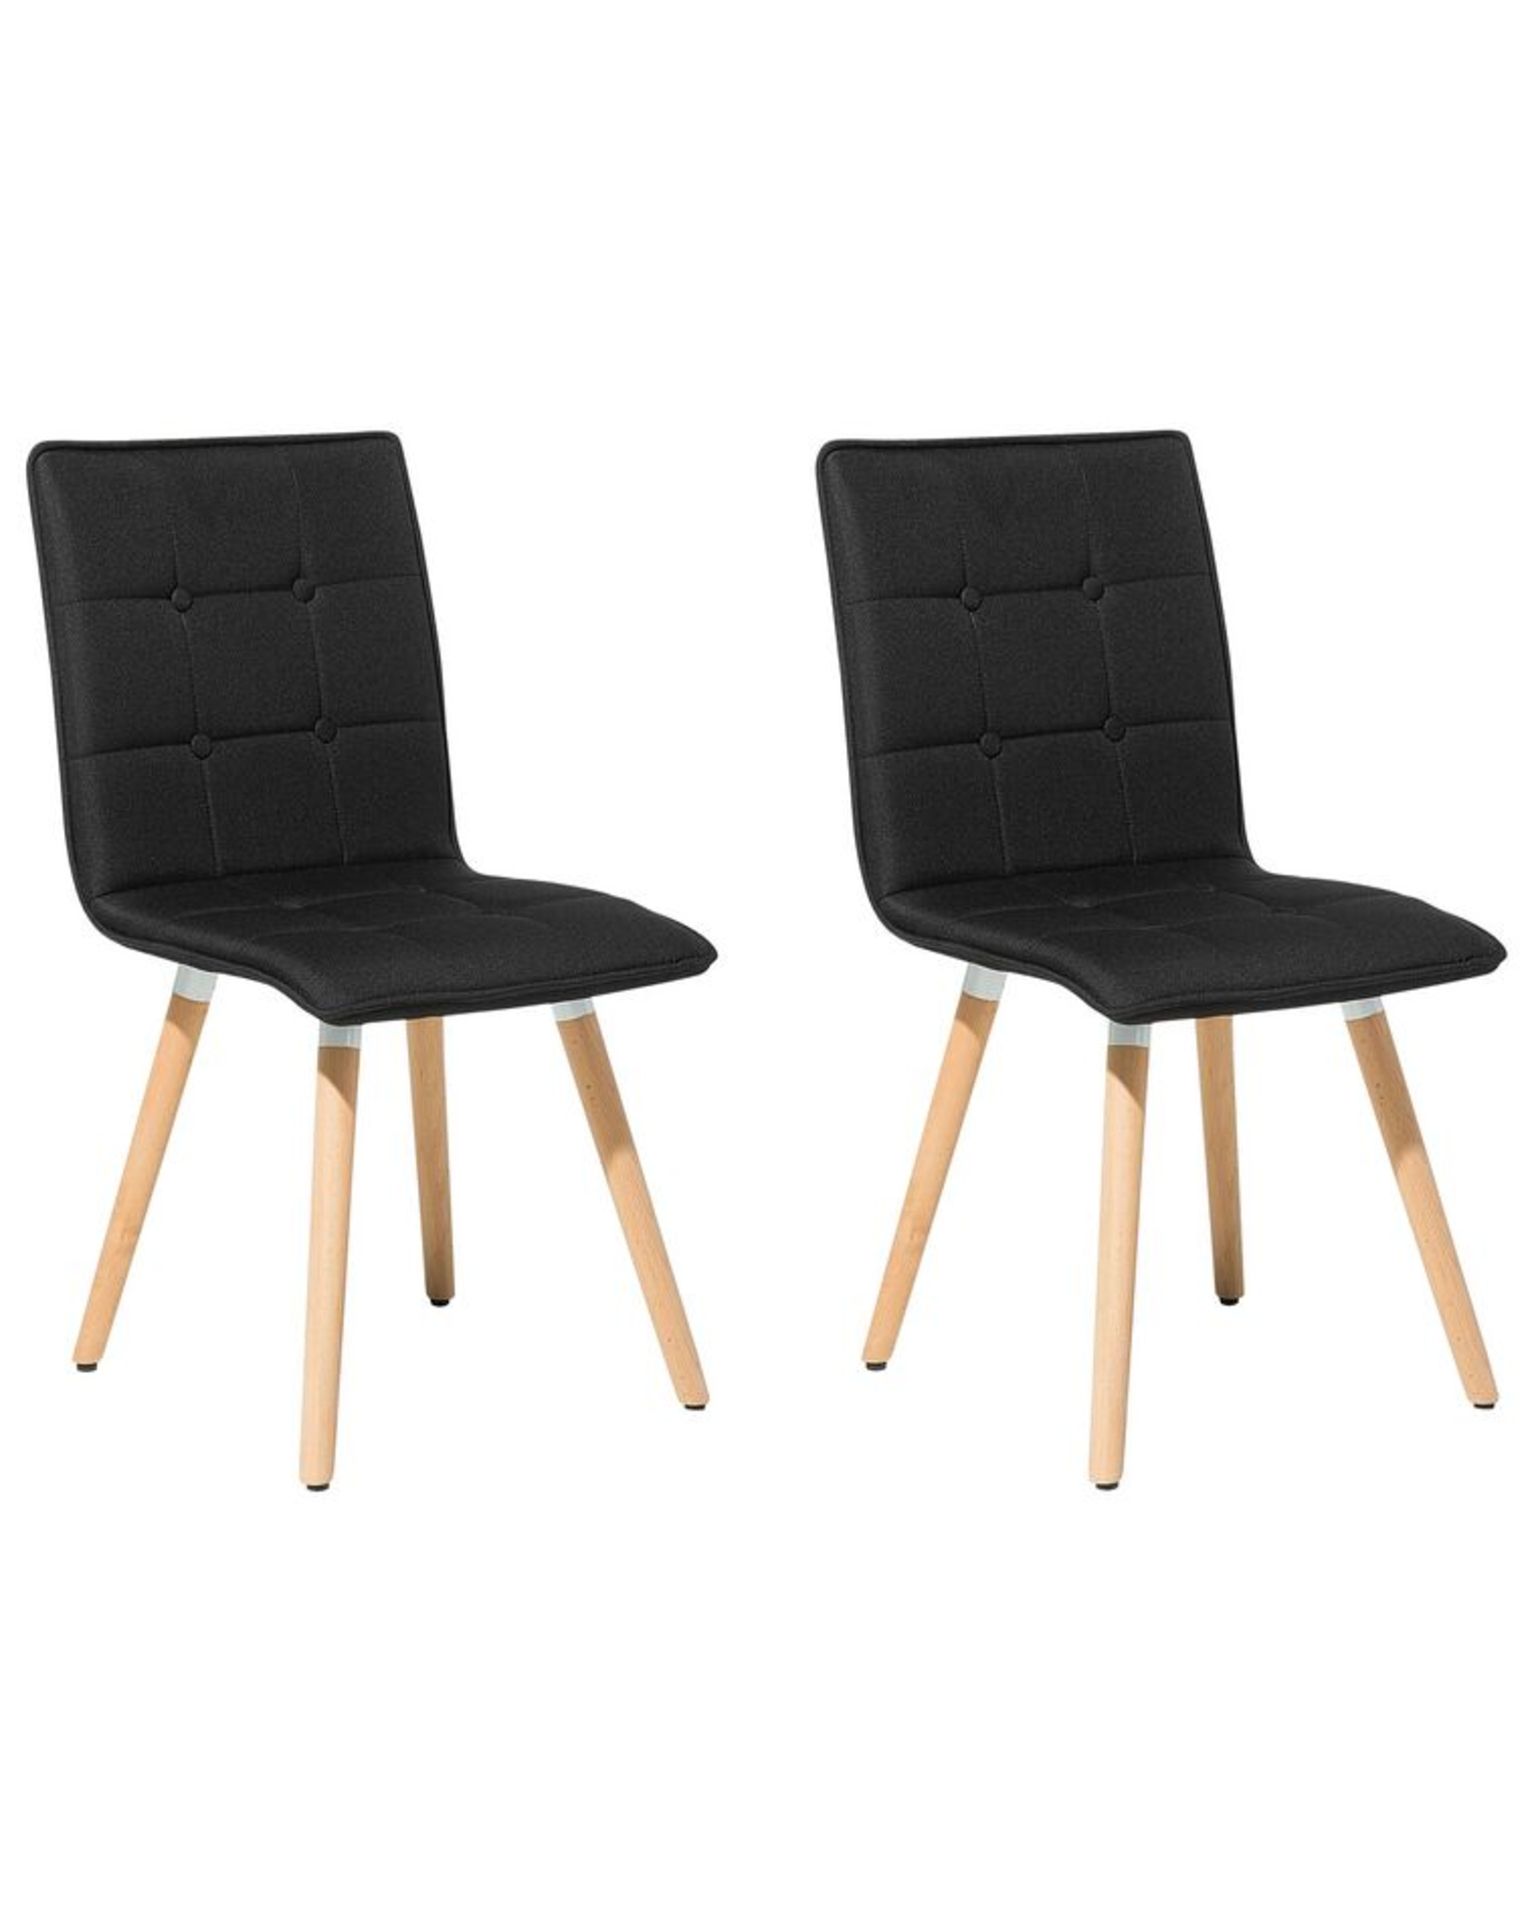 Brooklyn Set of 2 Fabric Dining Chairs Black - R13a.11. RRP £219.99. An incredibly comfortable